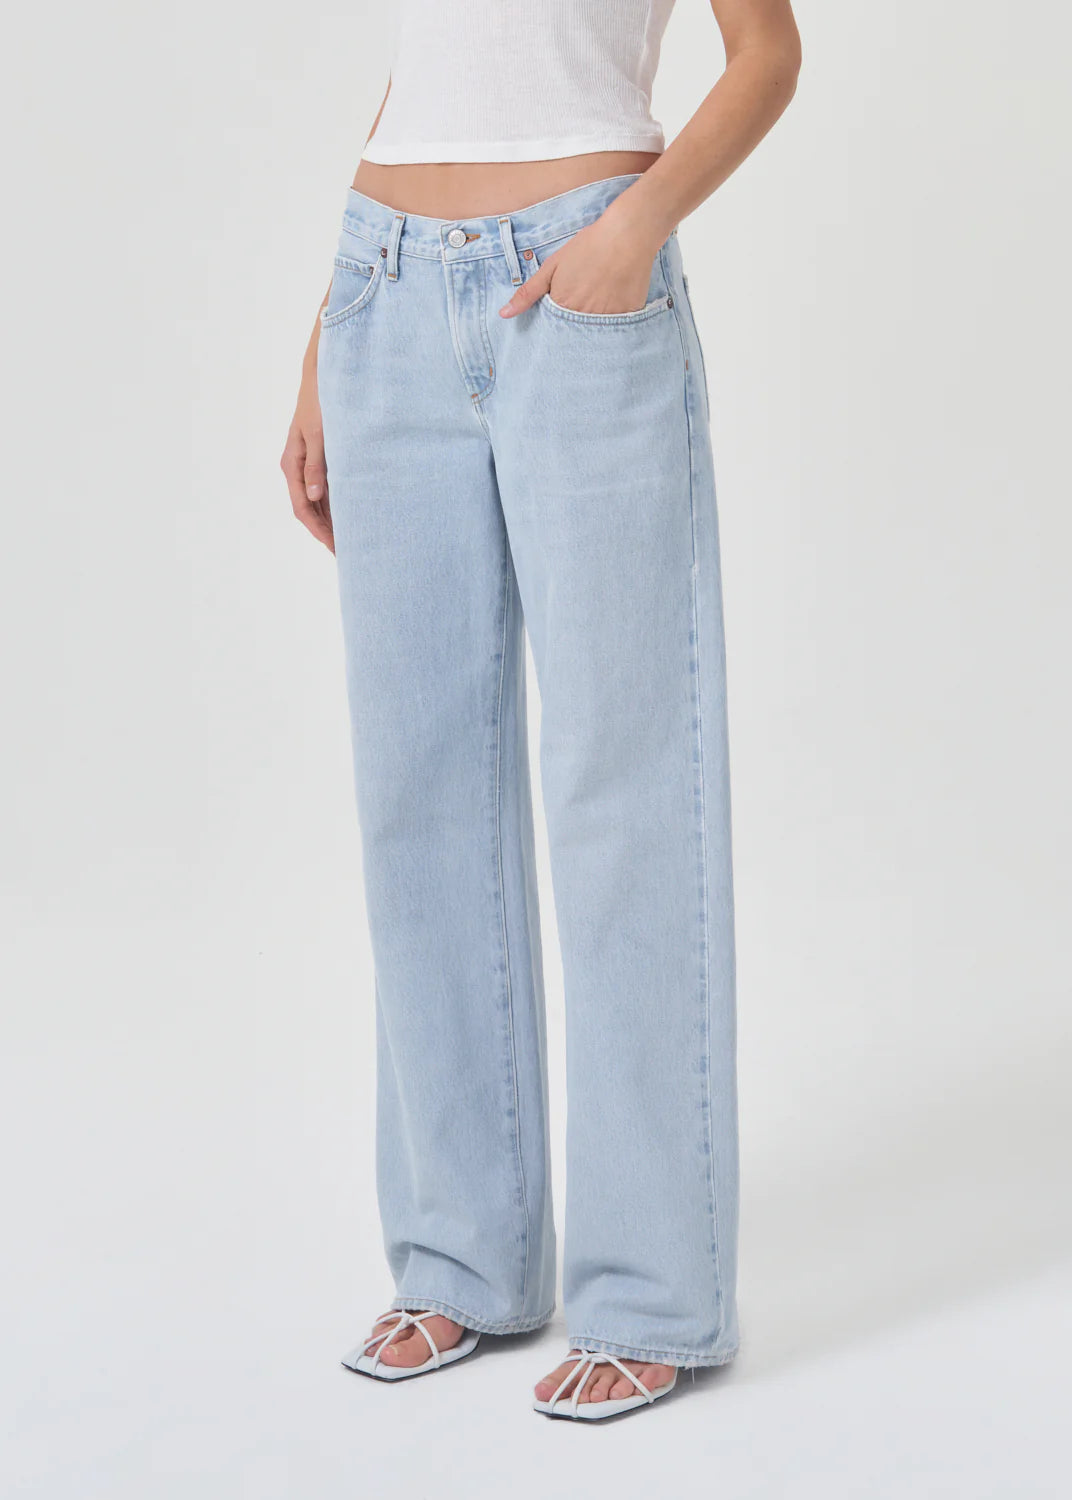 Agolde Fusion Jeans